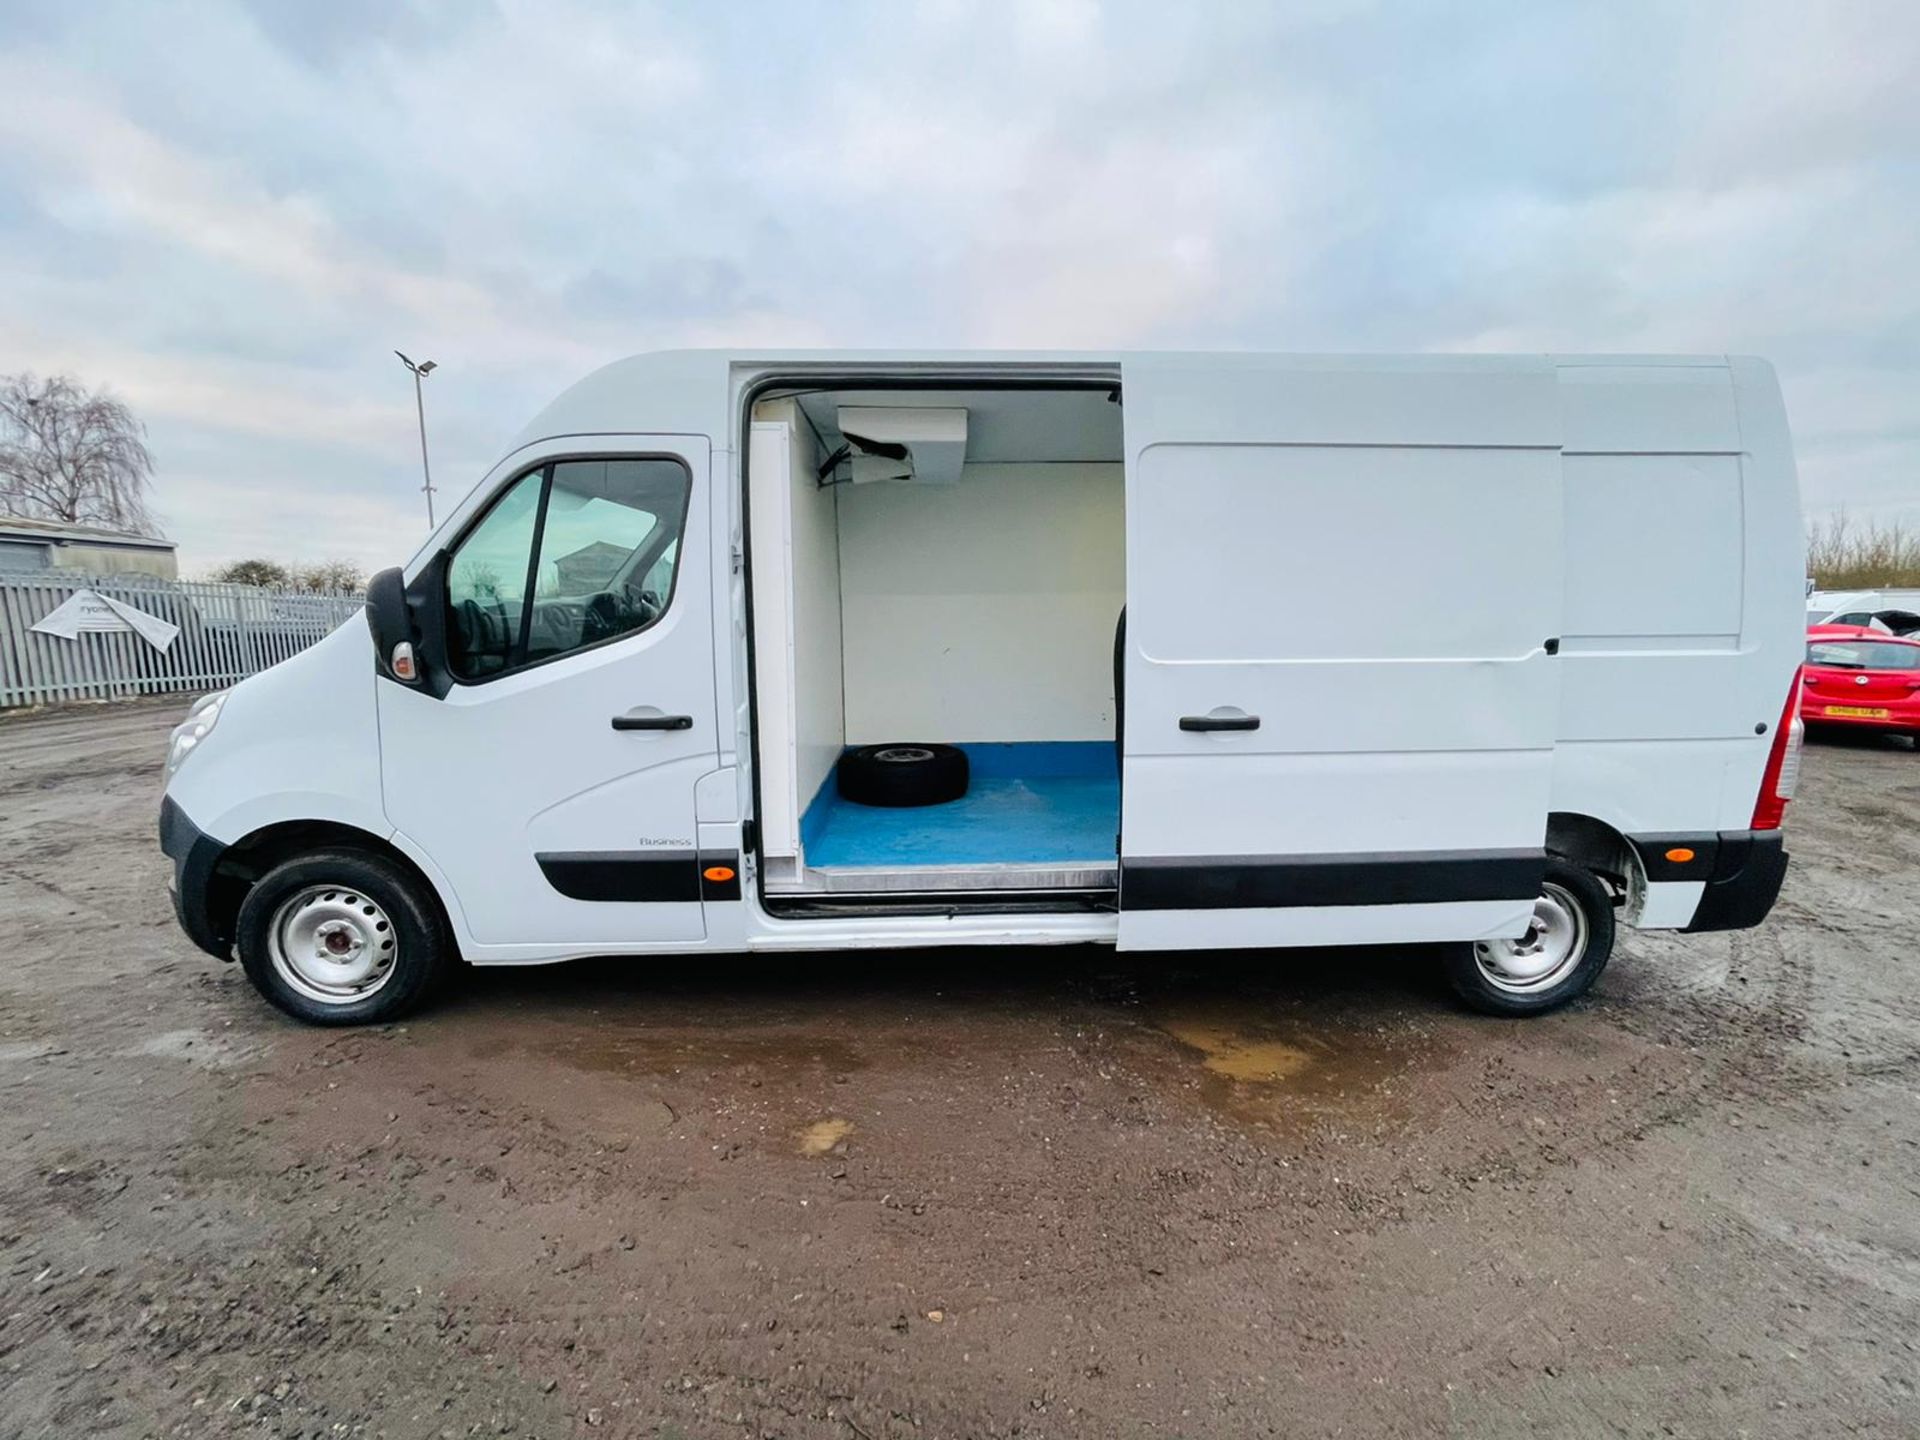 Renault Master 2.3 DCI 110 Business LM35 L3 H2 2016 '16 reg' Fridge/Freezer - Fully Insulated - Image 8 of 23